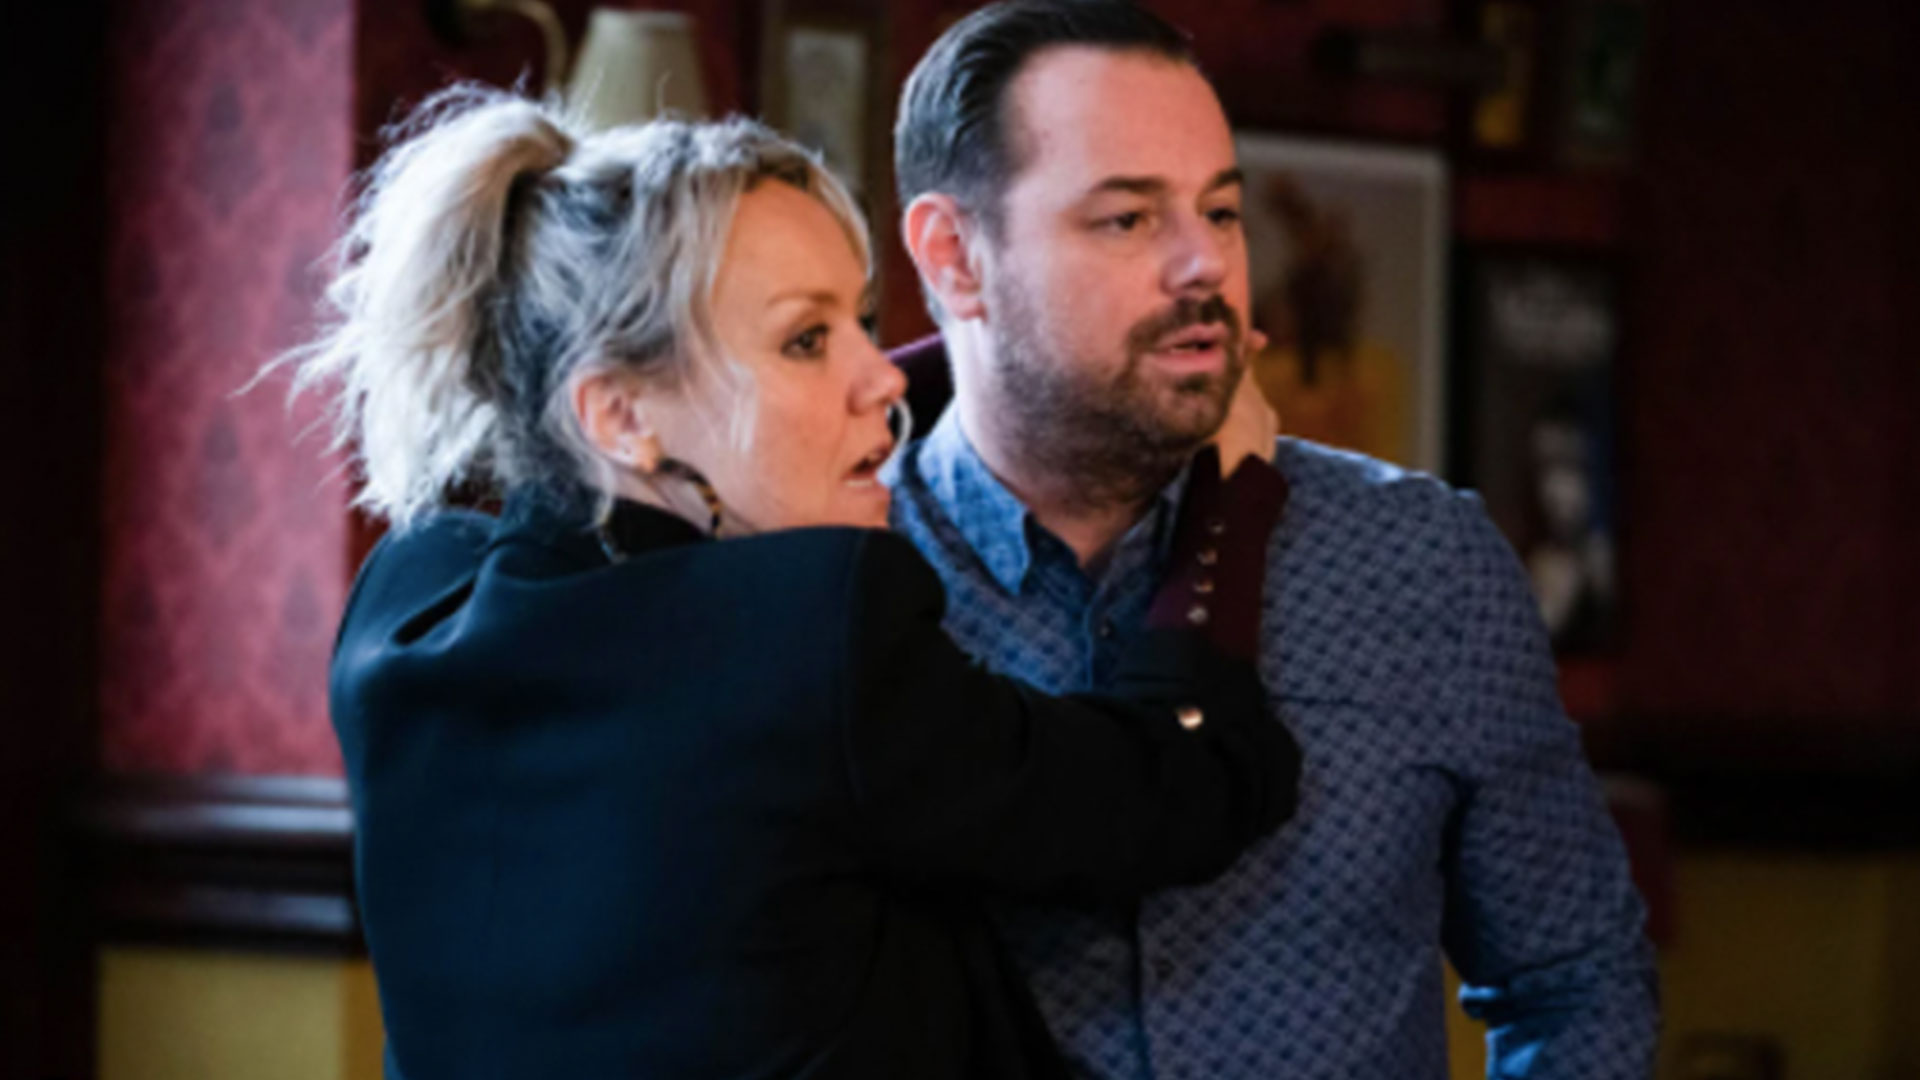 EastEnders fans all say the same thing as Mick Carter drops bombshell confession on Janine